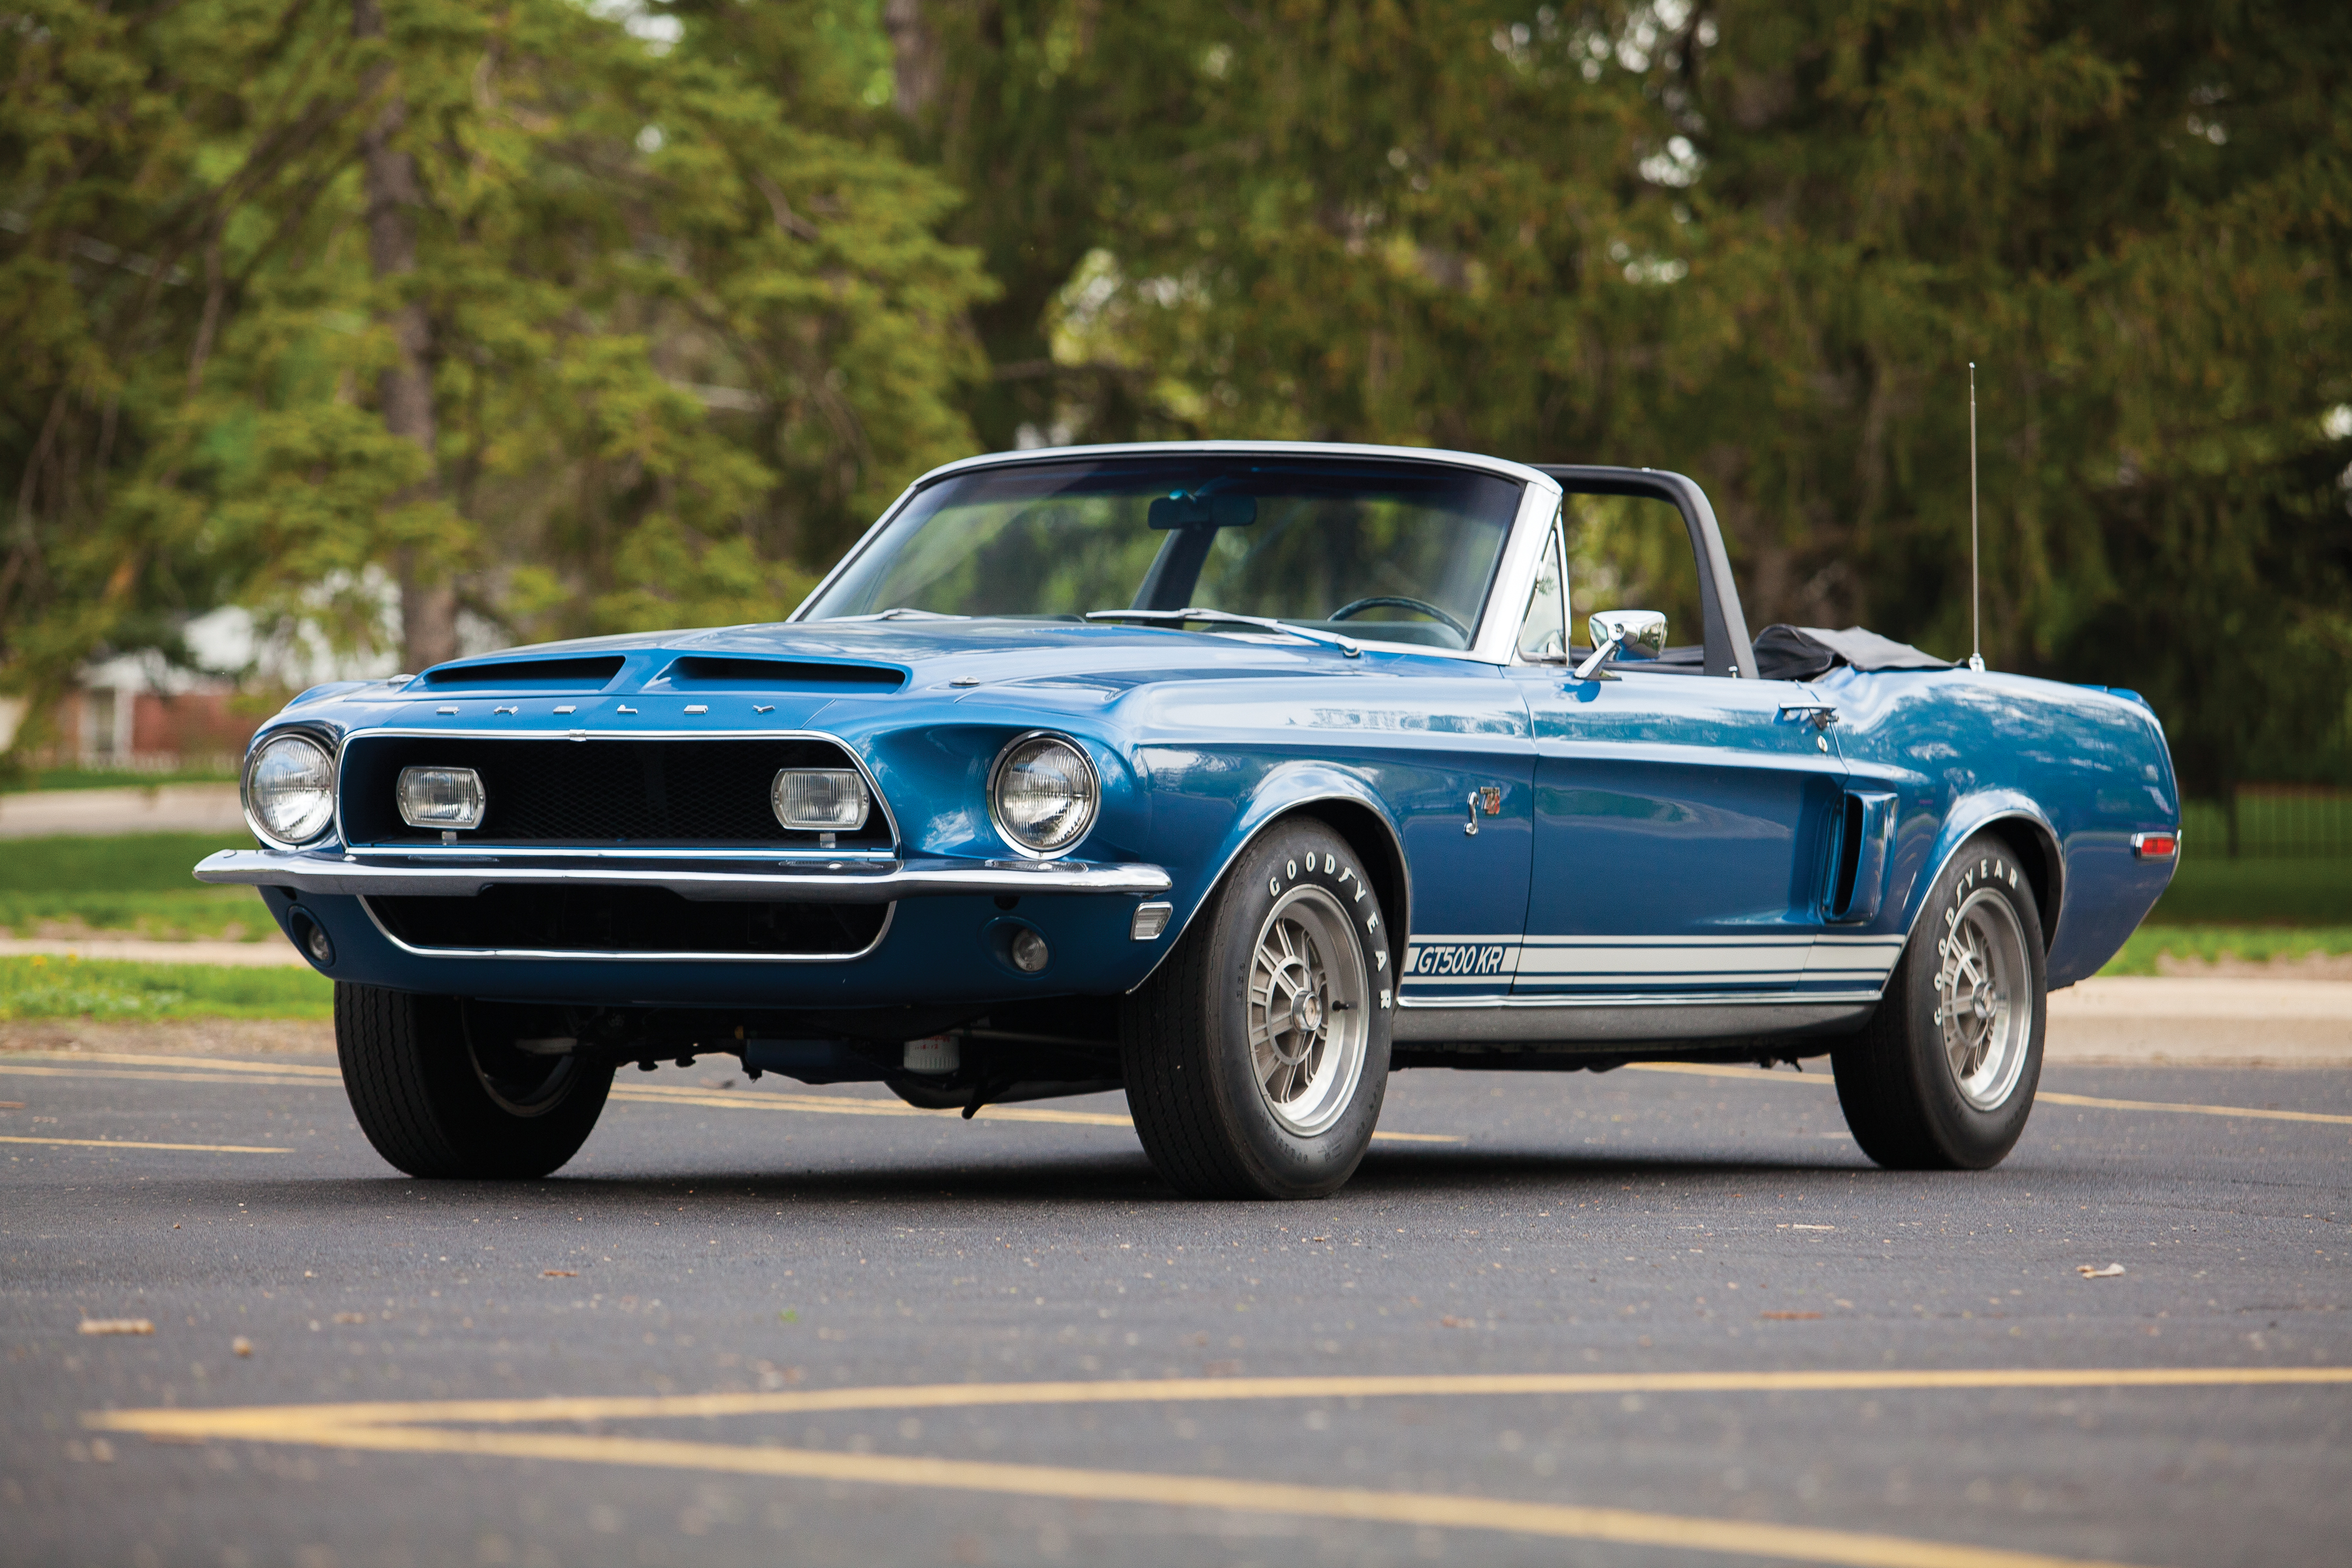 Blue Car Car Convertible Muscle Car Shelby Cobra Gt500 King Of The Road 3600x2400